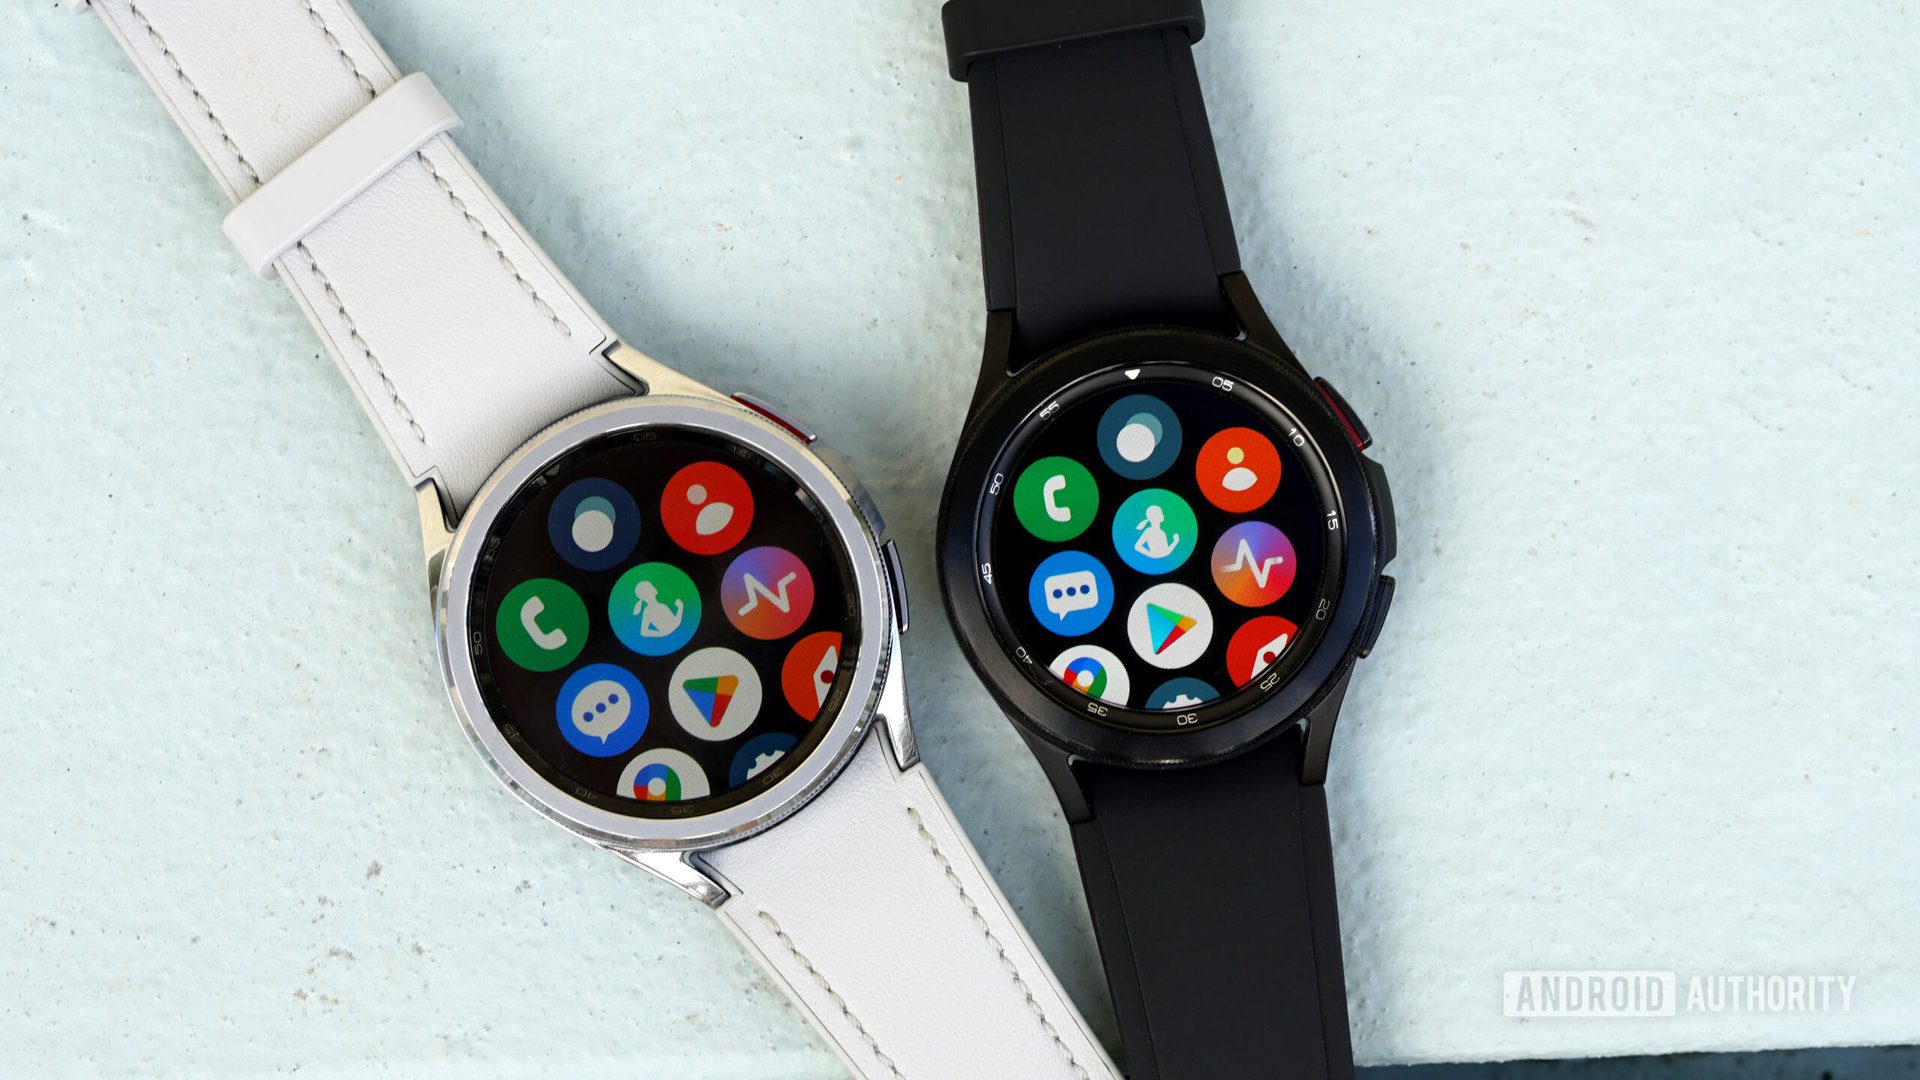 FCC listings hint at affordable Galaxy Watch FE variant coming this summer